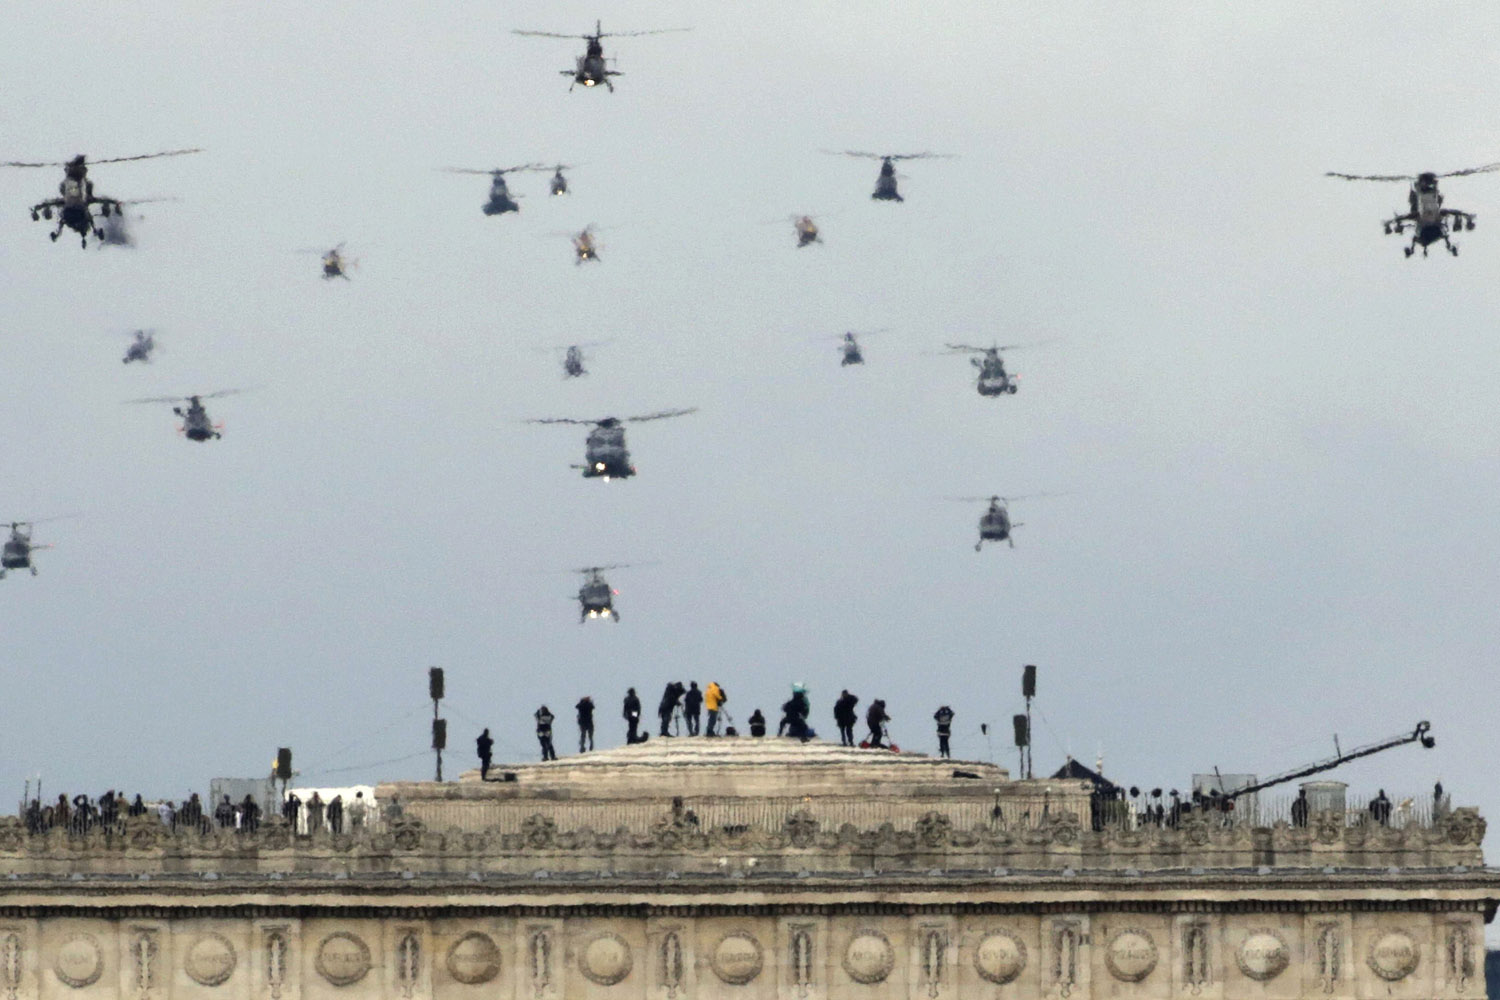 July 14, 2012. A formation of military helicopters fly over the Arc de Triomphe during the traditional Bastille Day military parade in Paris.